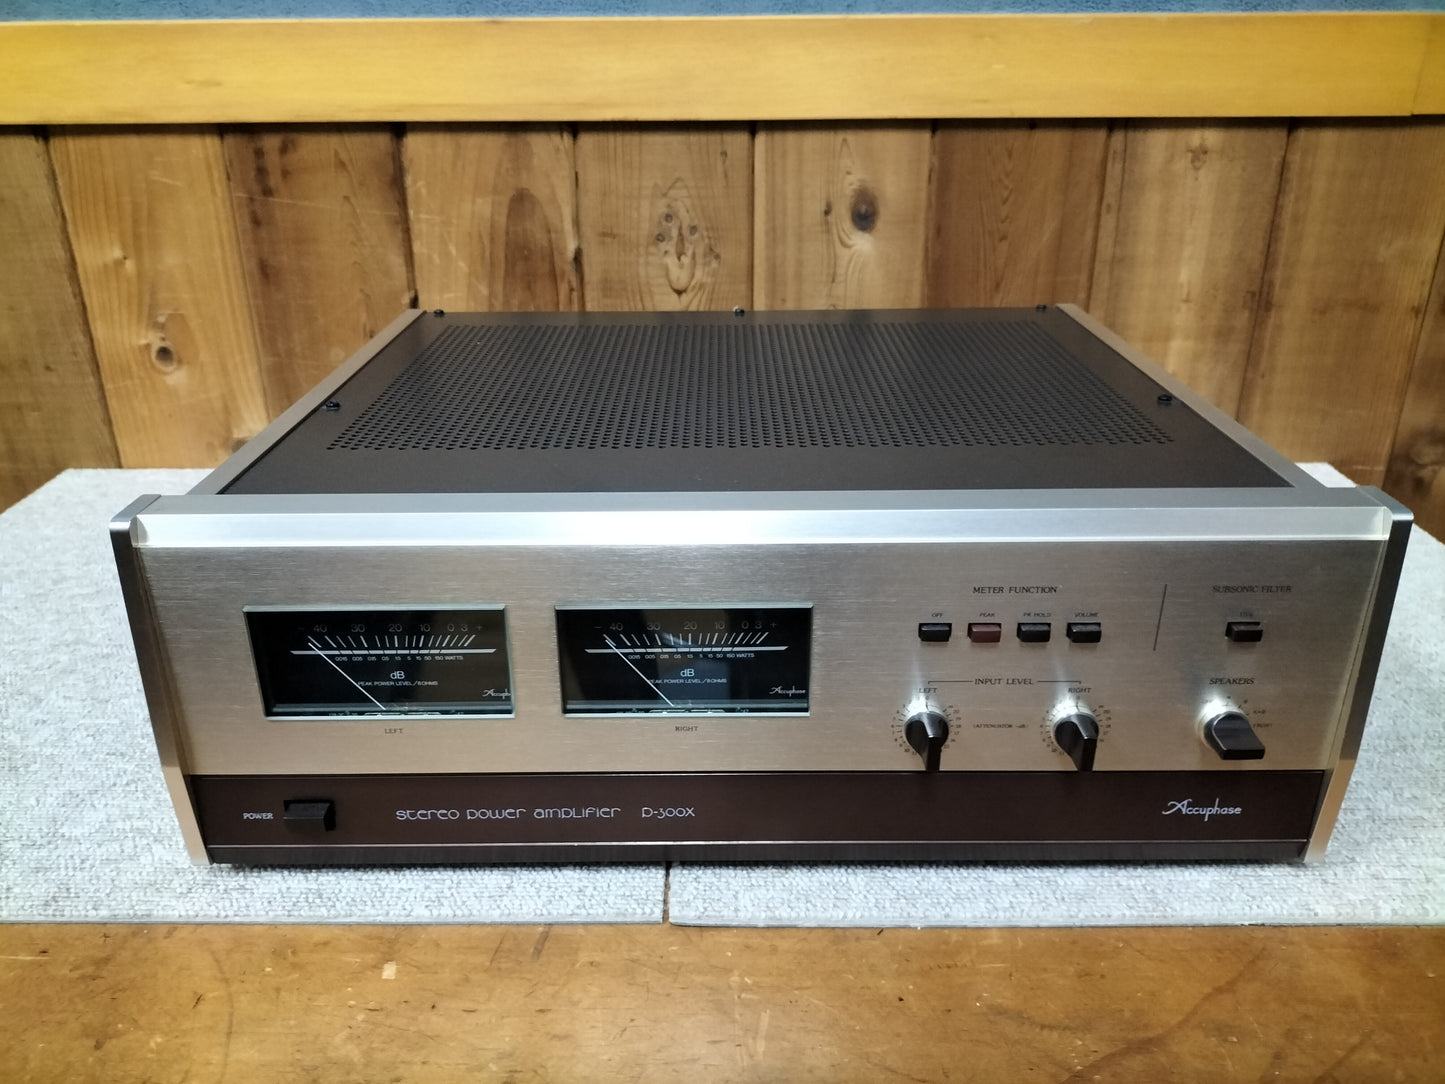 Accuphase　アキュフェーズ　P-300X　パワーアンプ 23092101